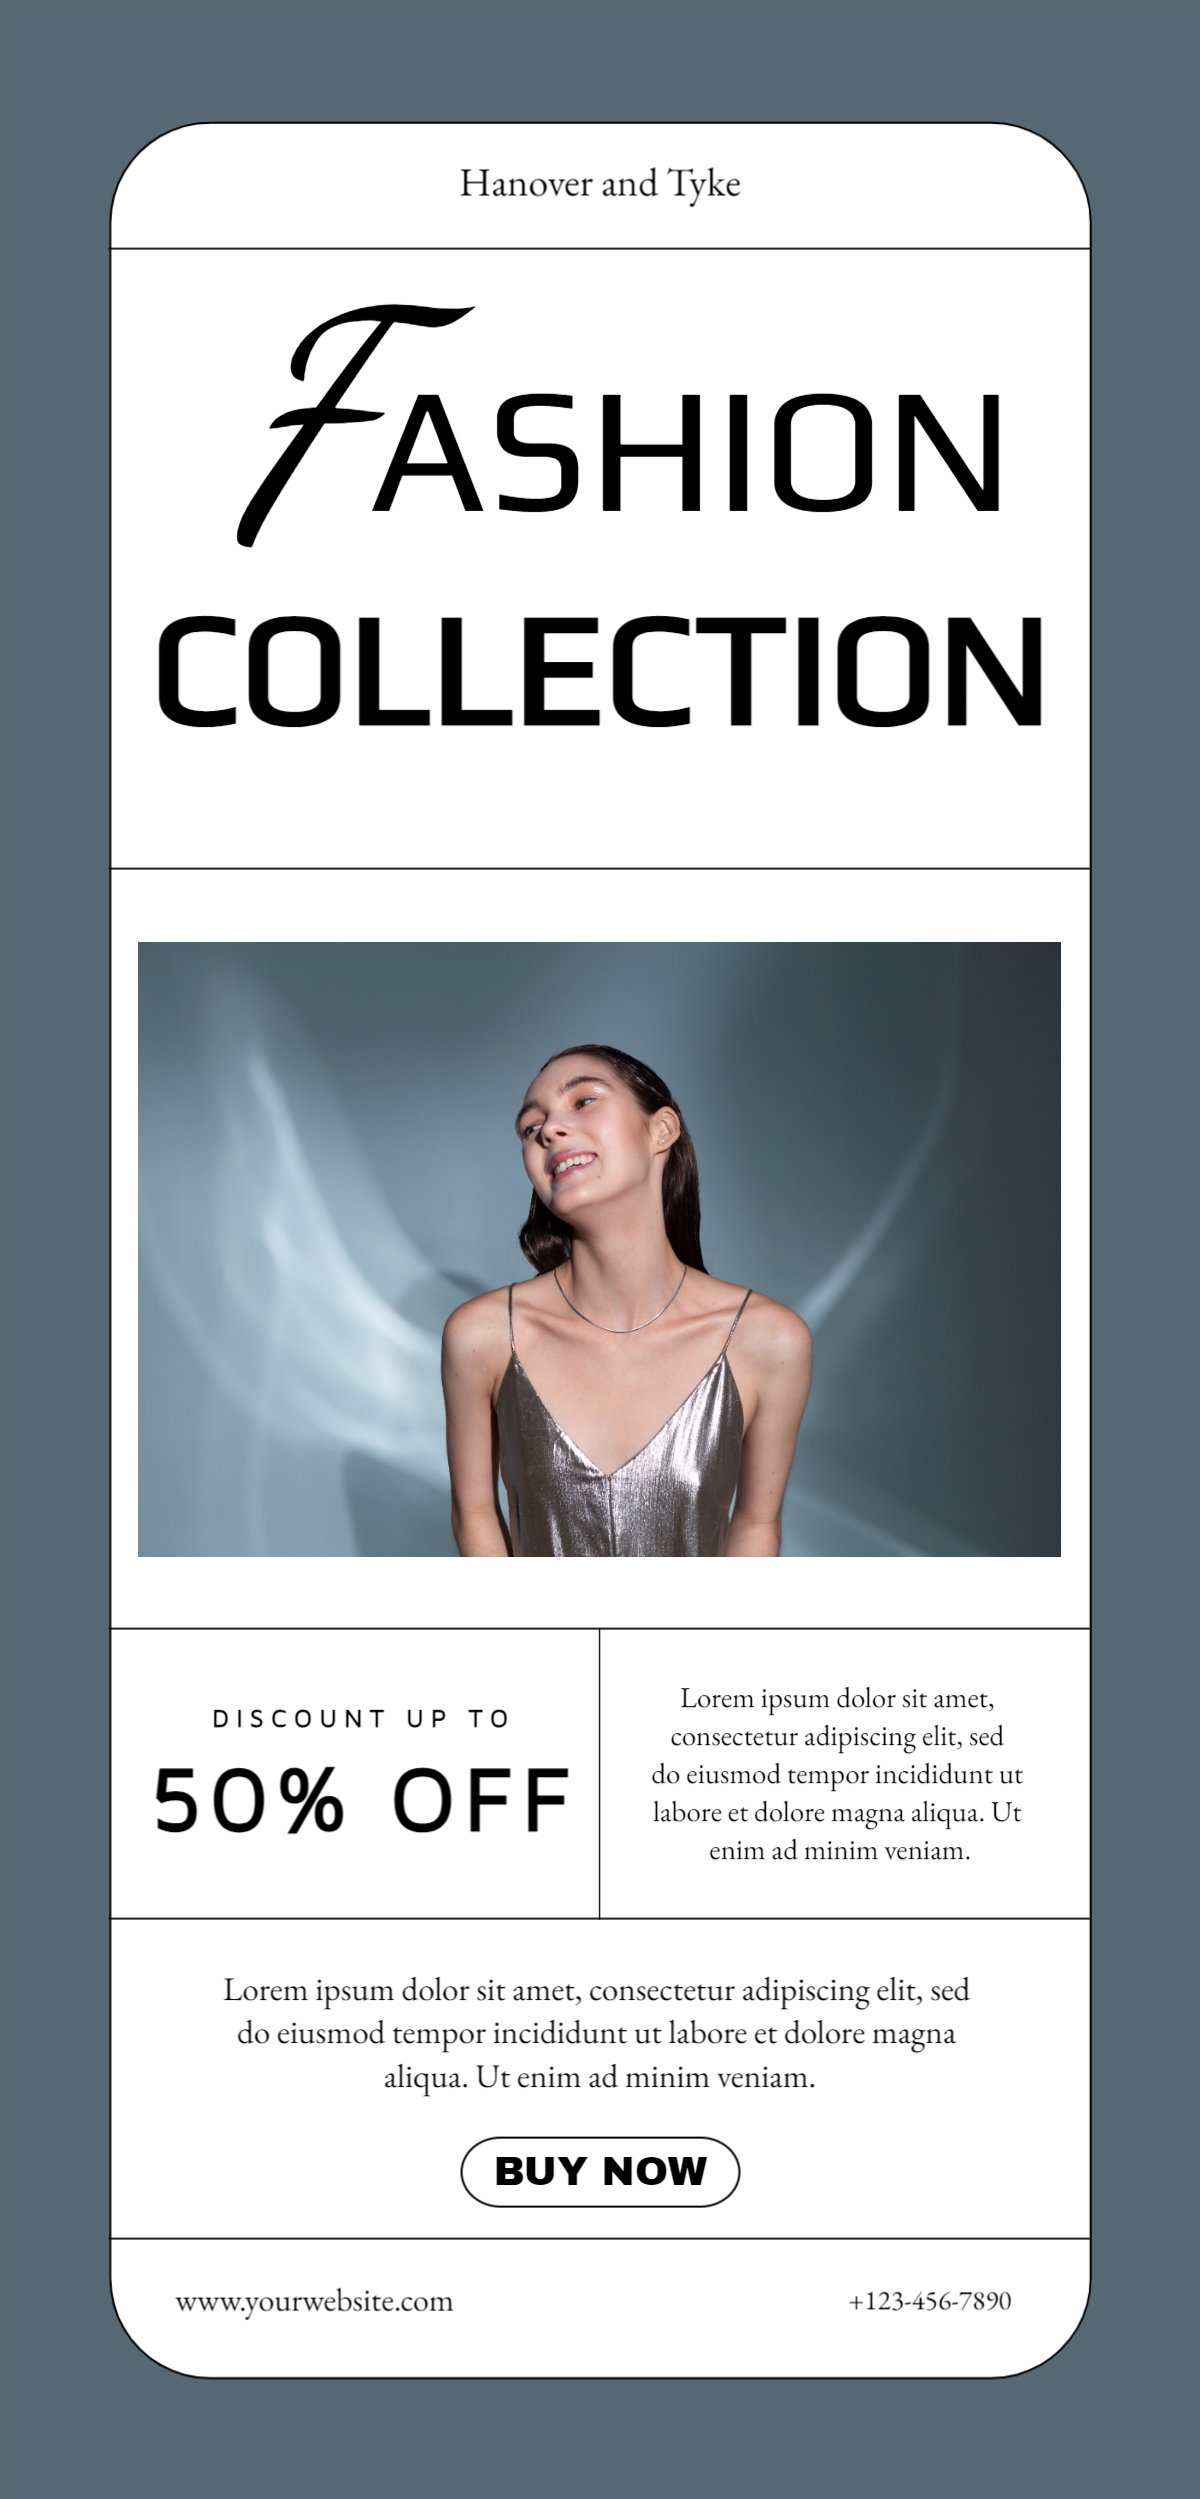 Fashion Collection Banner design download for free